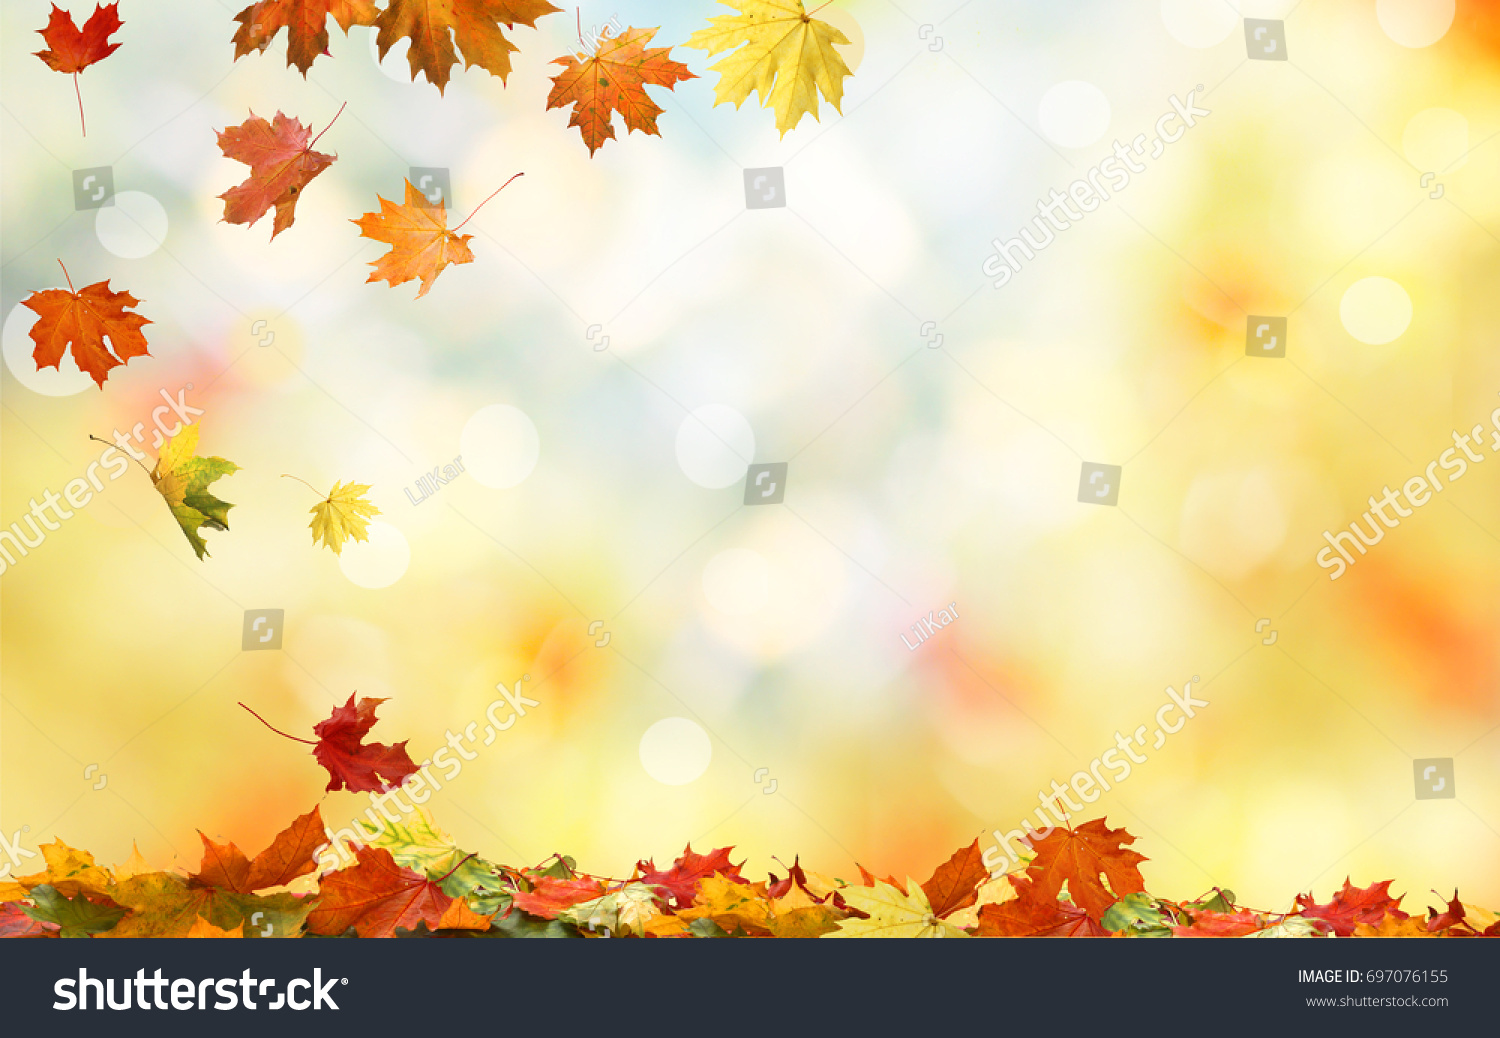 fall-leaves-powerpoint-background